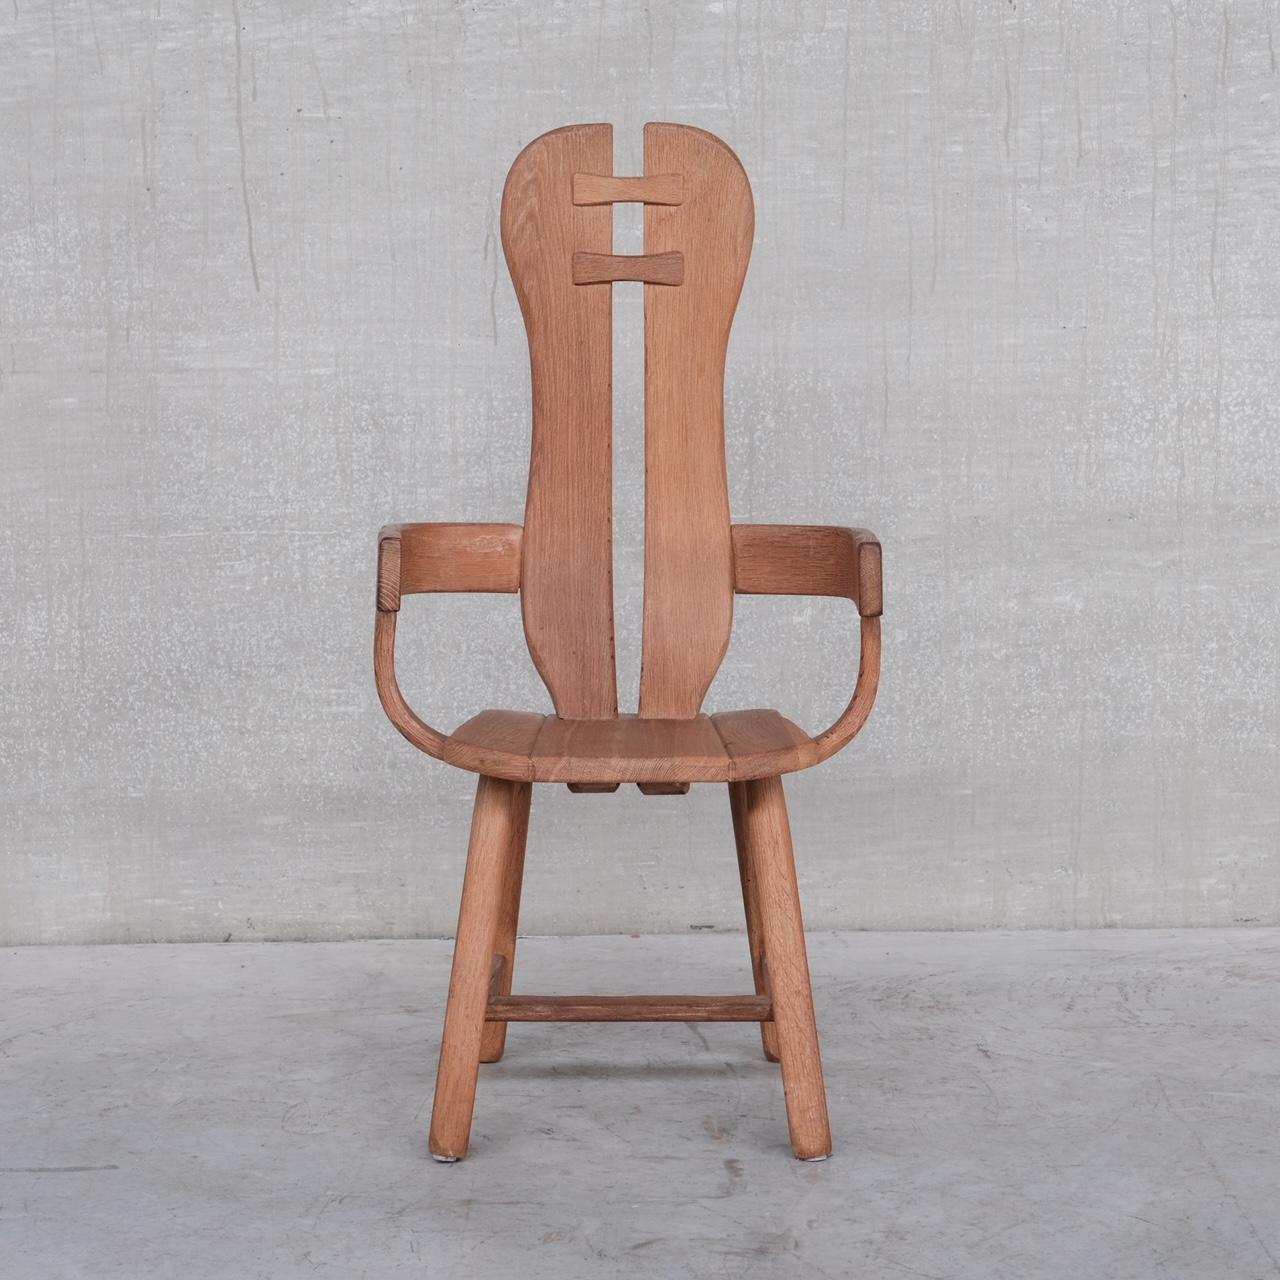 Oak dining or armchairs by De Puydt. 

Belgium, c1970s. 

A flexible chair that can be used in the dining room, living room or bedroom as an occasional chair. 

Some wear commensurate with age. 

Priced and sold individually. 

Location: Belgium